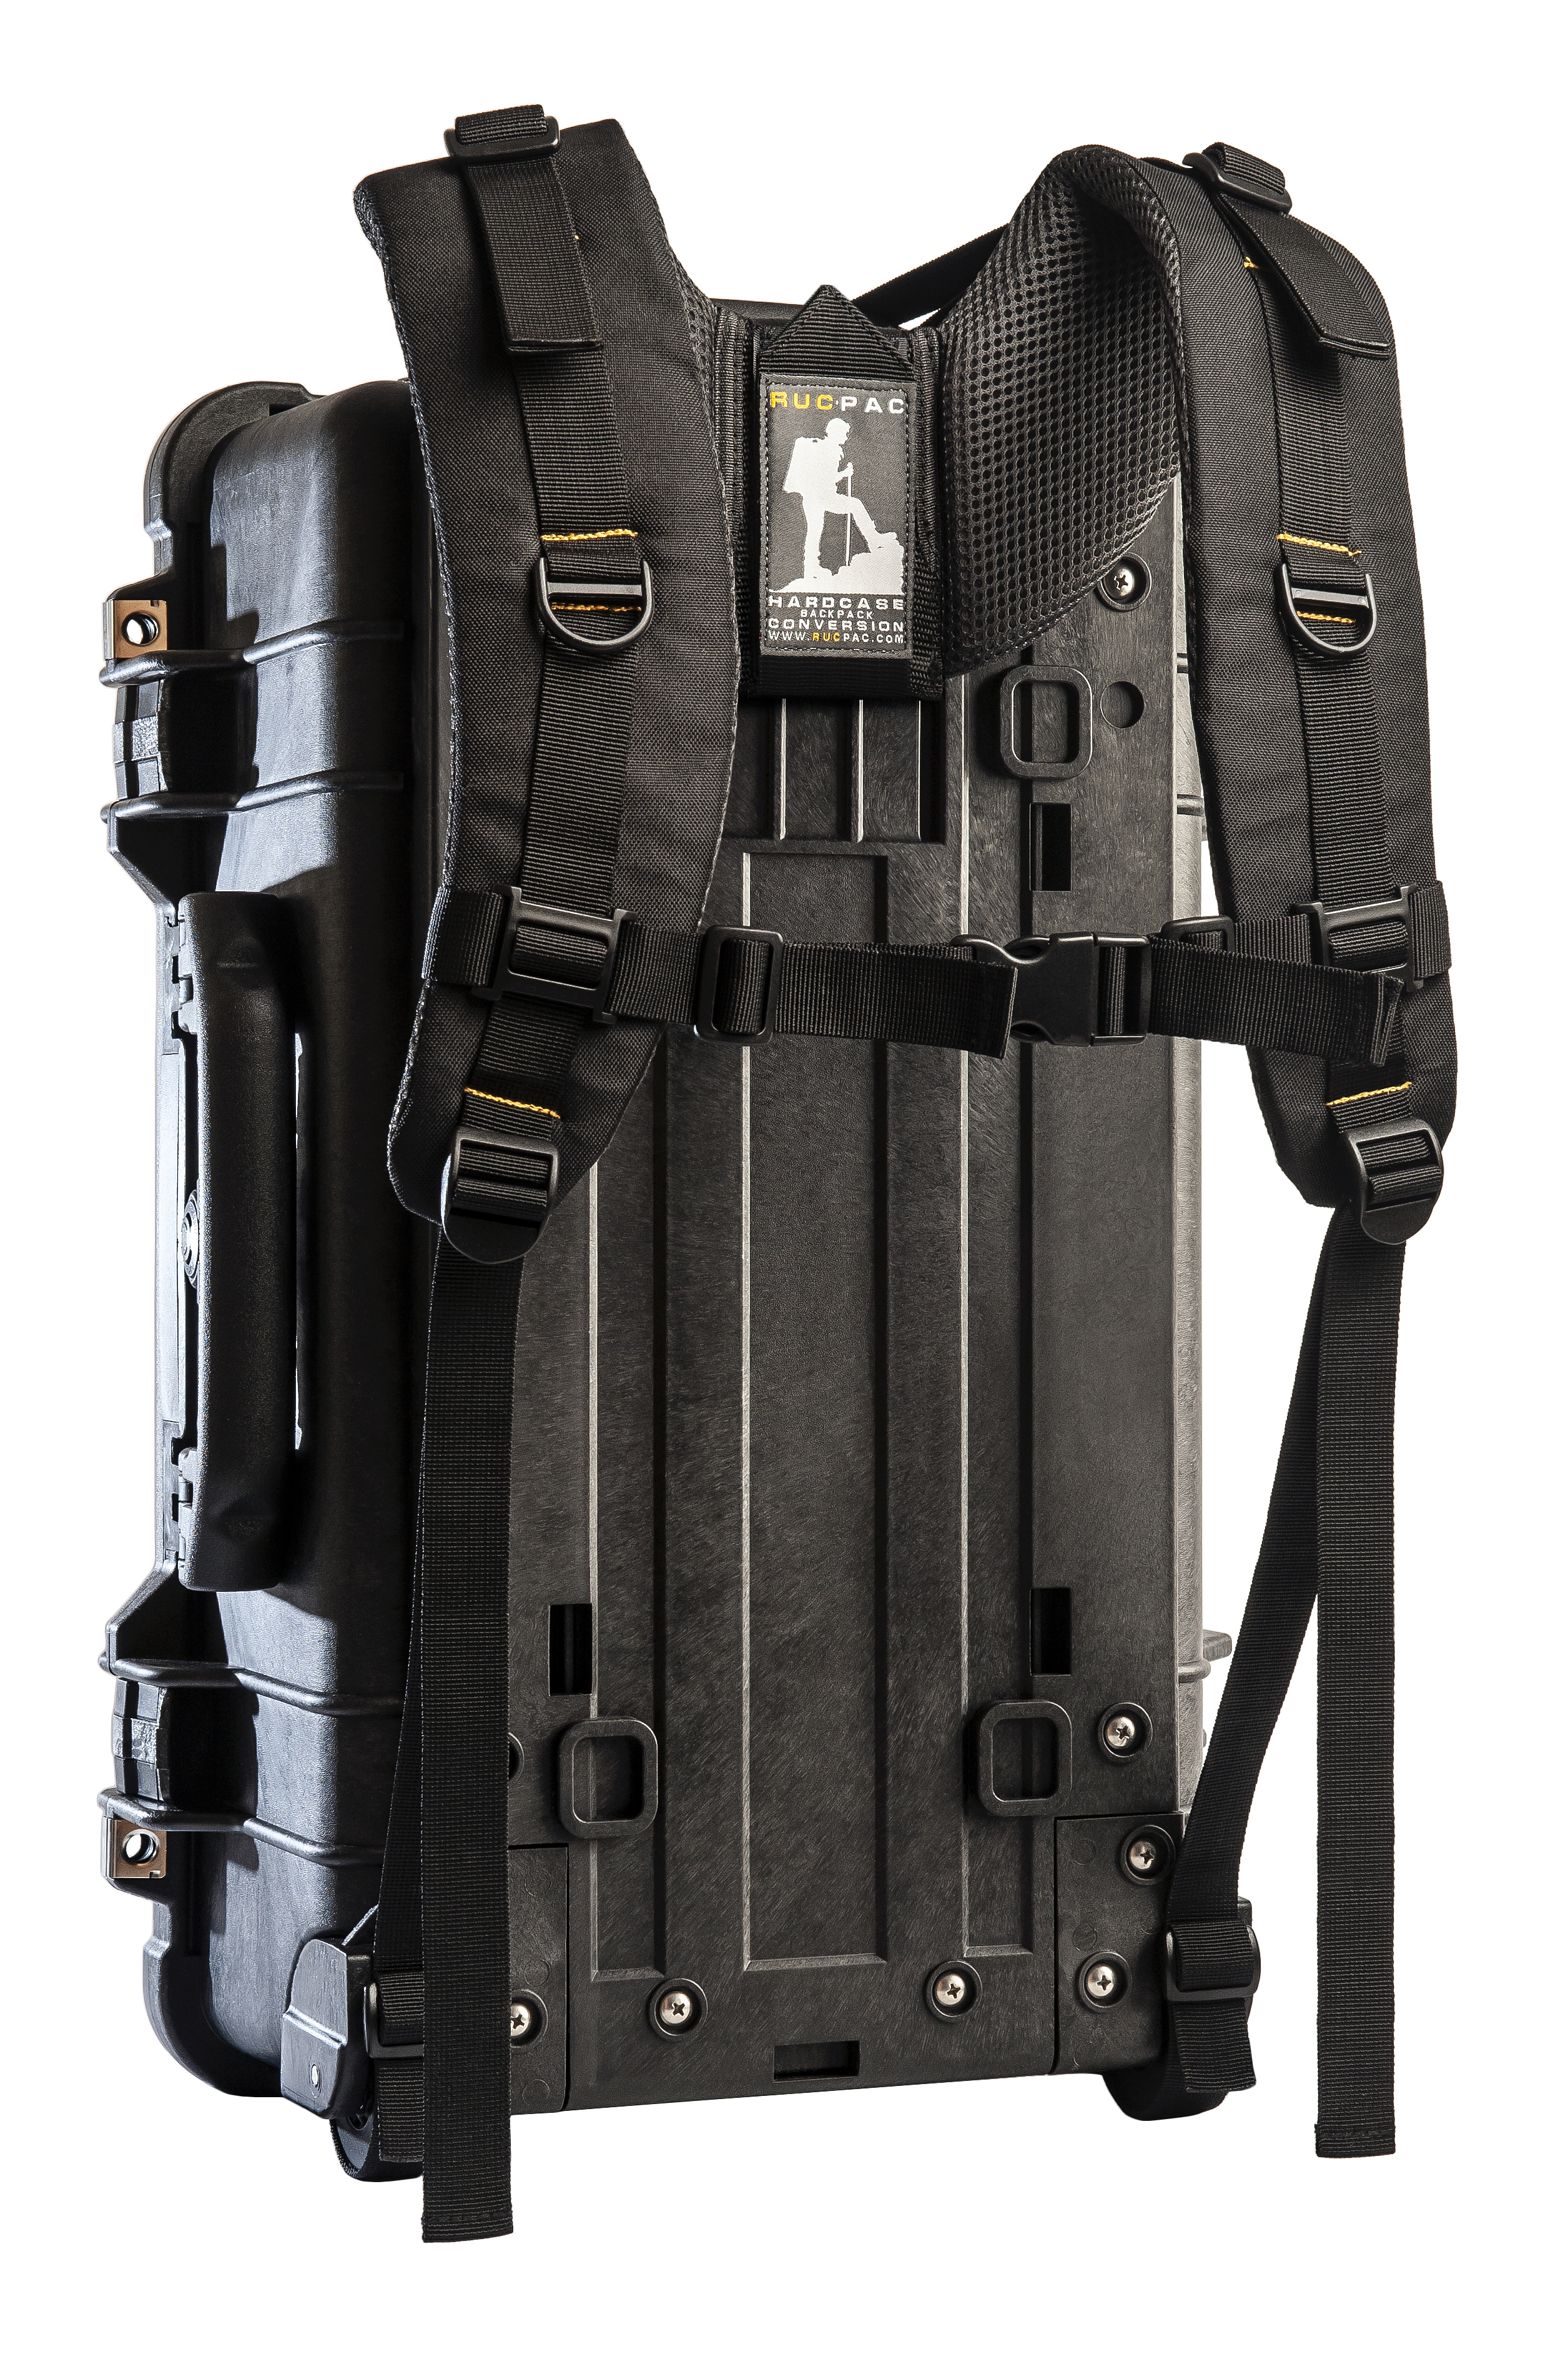 RucPac Hardcase Backpack Conversion - RucPac Official Website